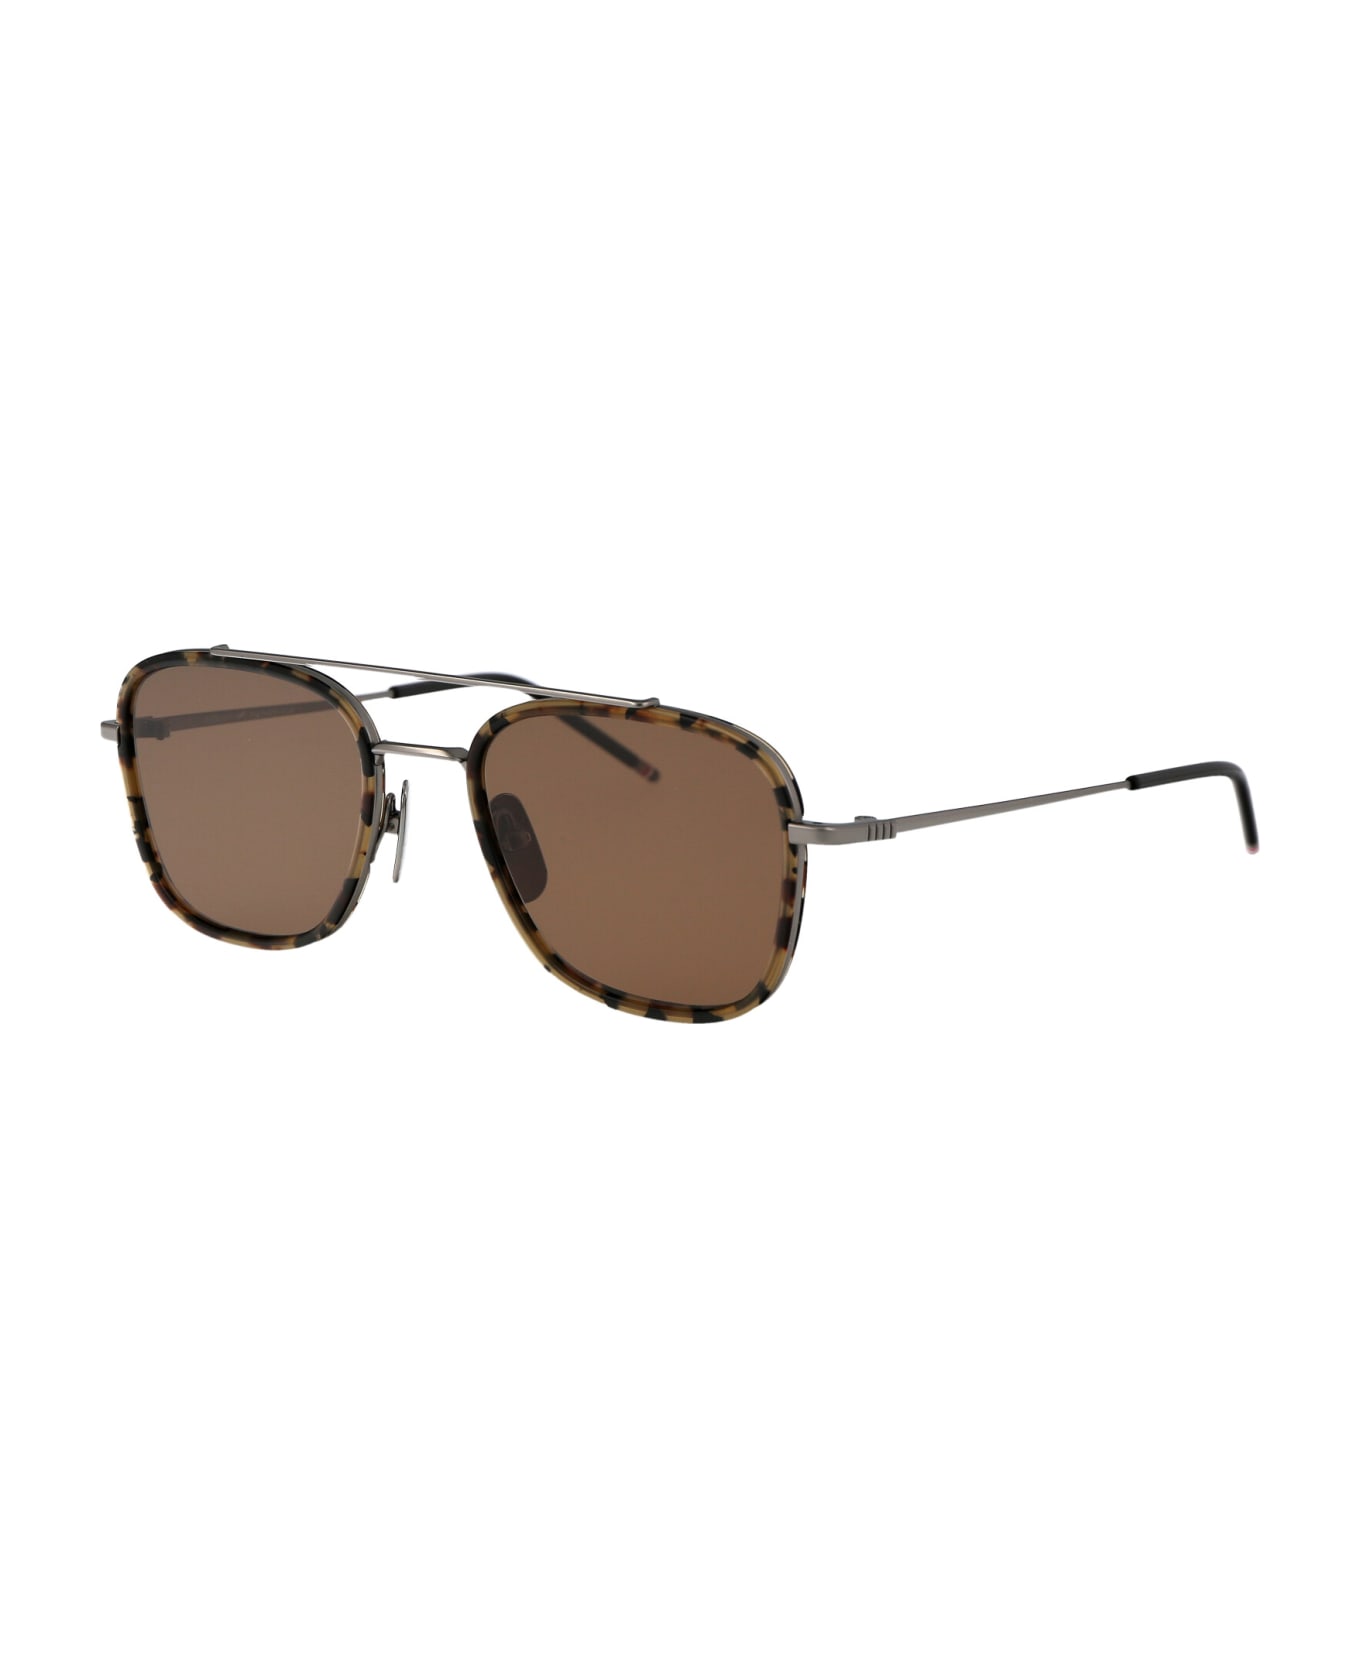 Thom Browne Ues800a-g0003-205-51 Sunglasses - 205 LIGHT SILVER